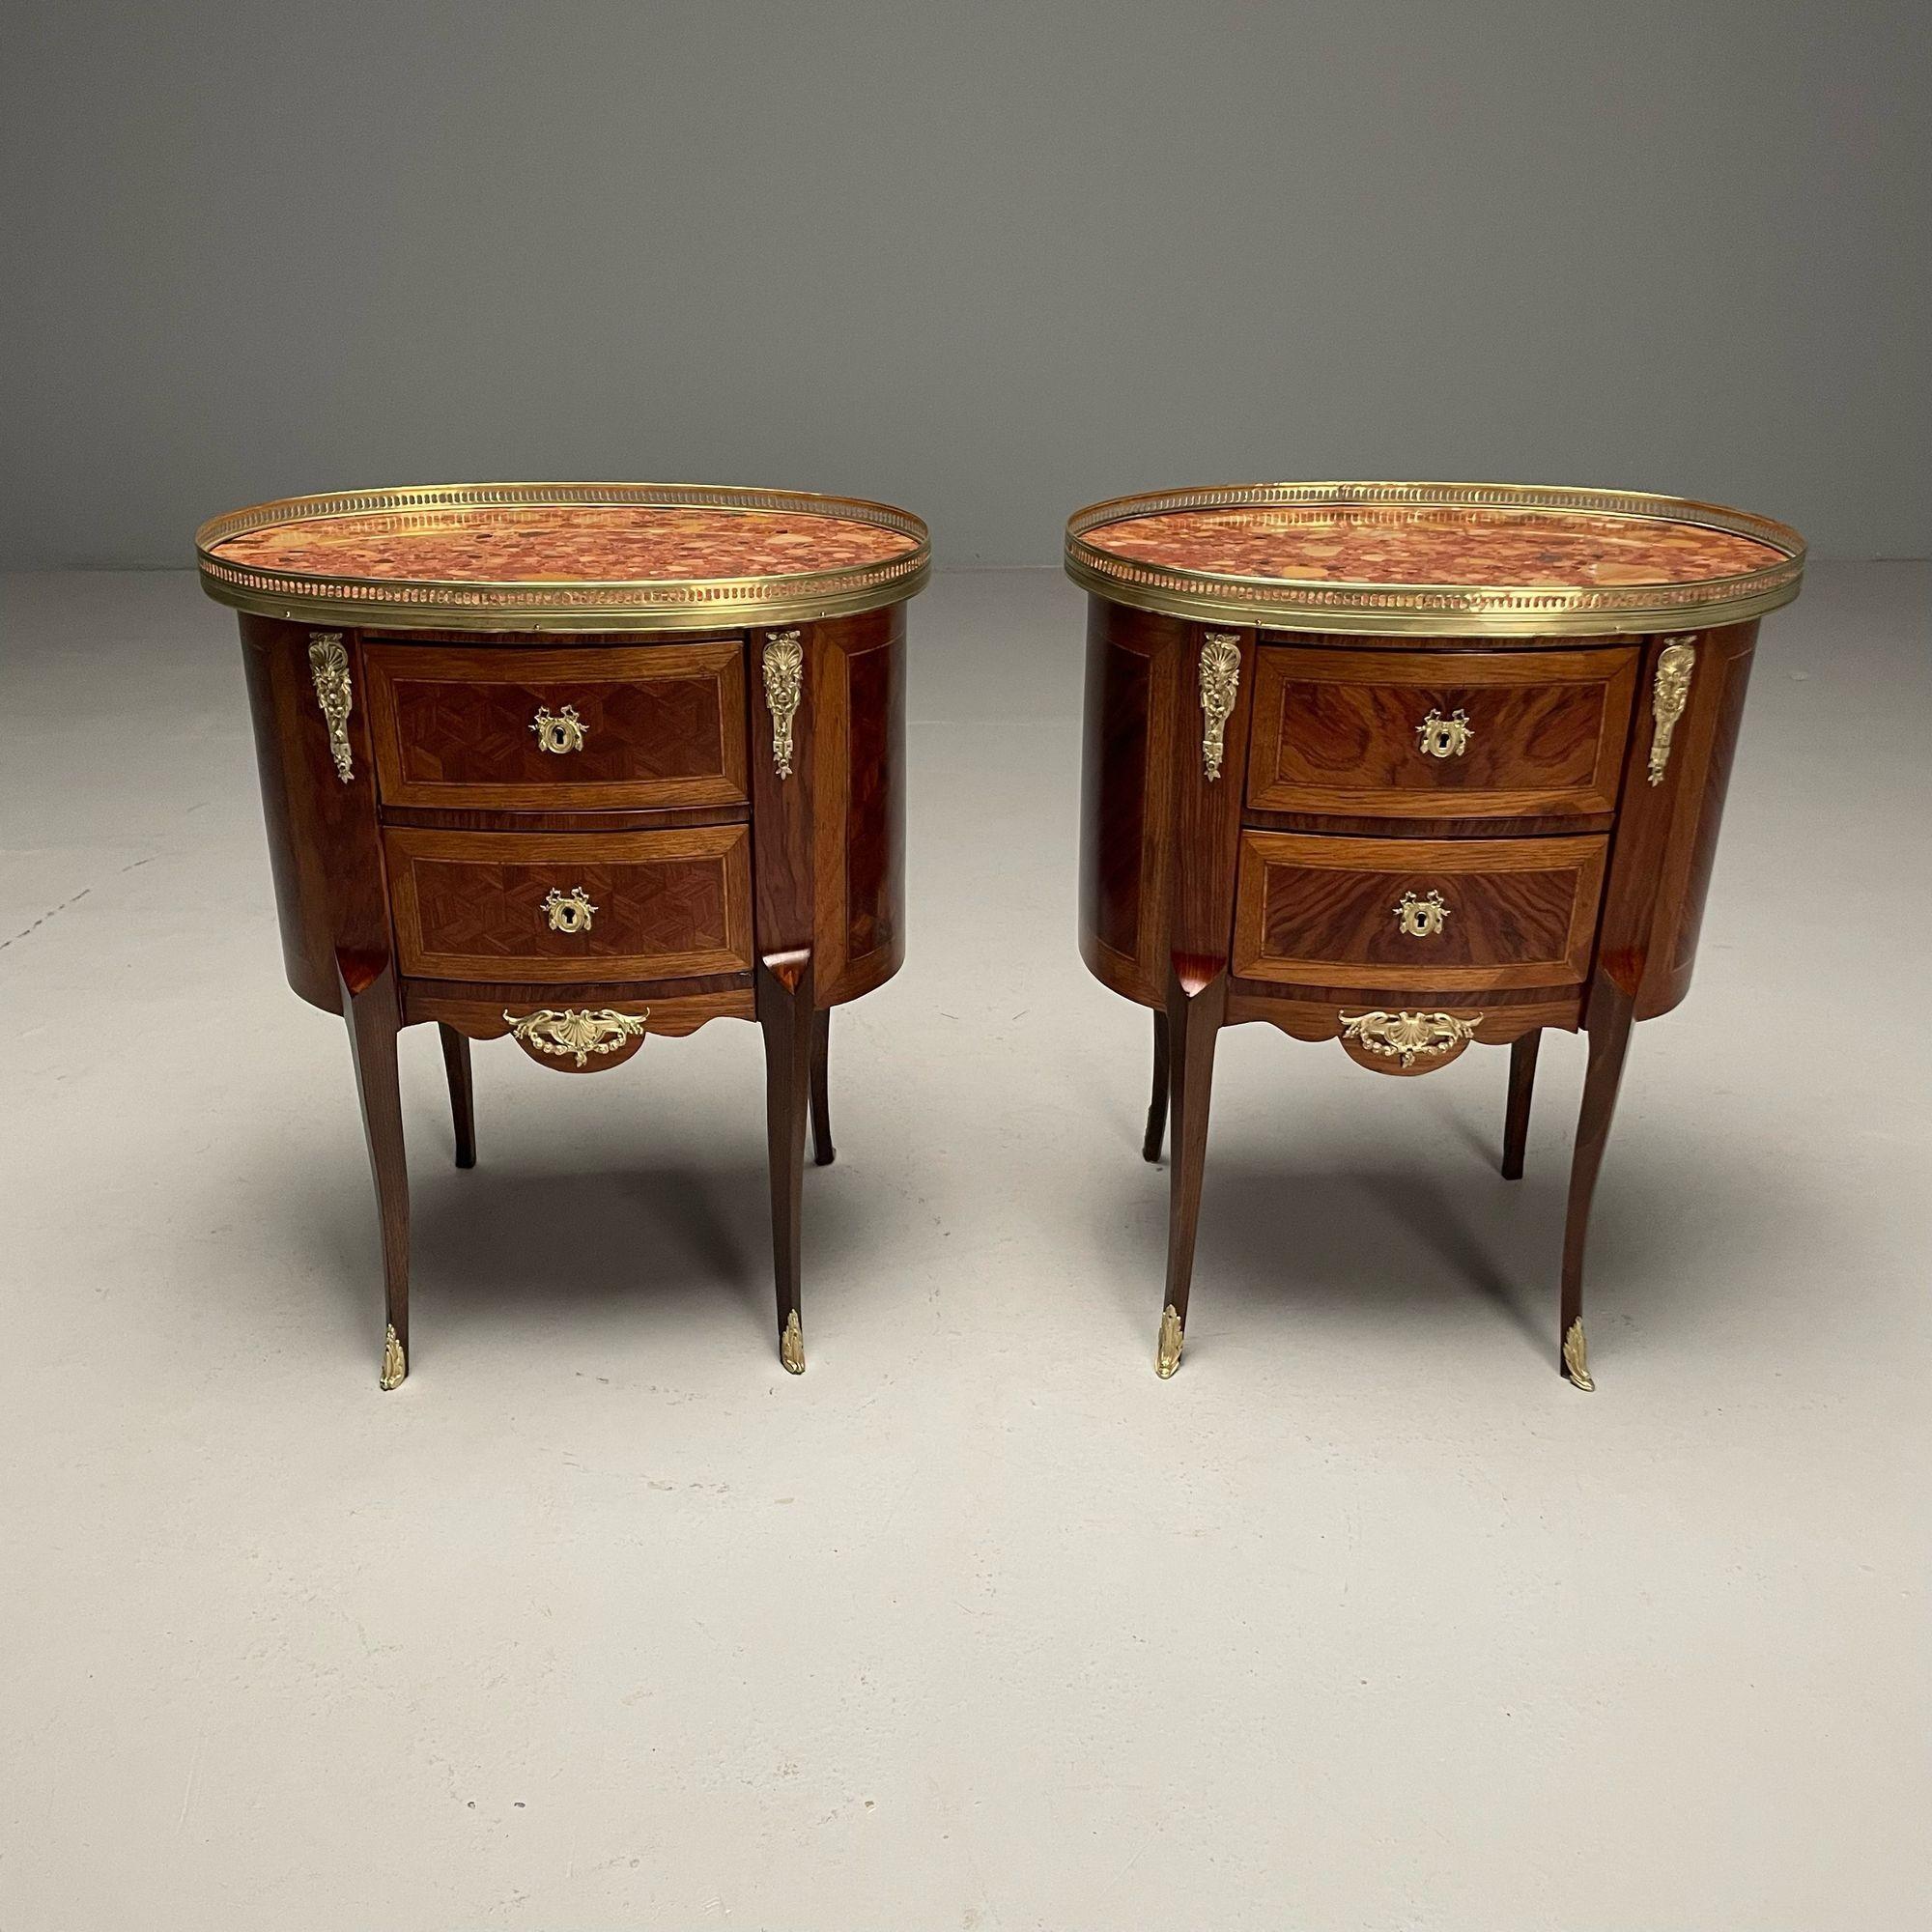 French Louis XV, Side Tables, Marquetry, Marble, Brass, France, 1930s

Pair of French Louis XV Style Side / End Tables, Nightstands, Marquetry, Marble Made in France pair of two drawer end tables or bedside stands having bronze framed galleried